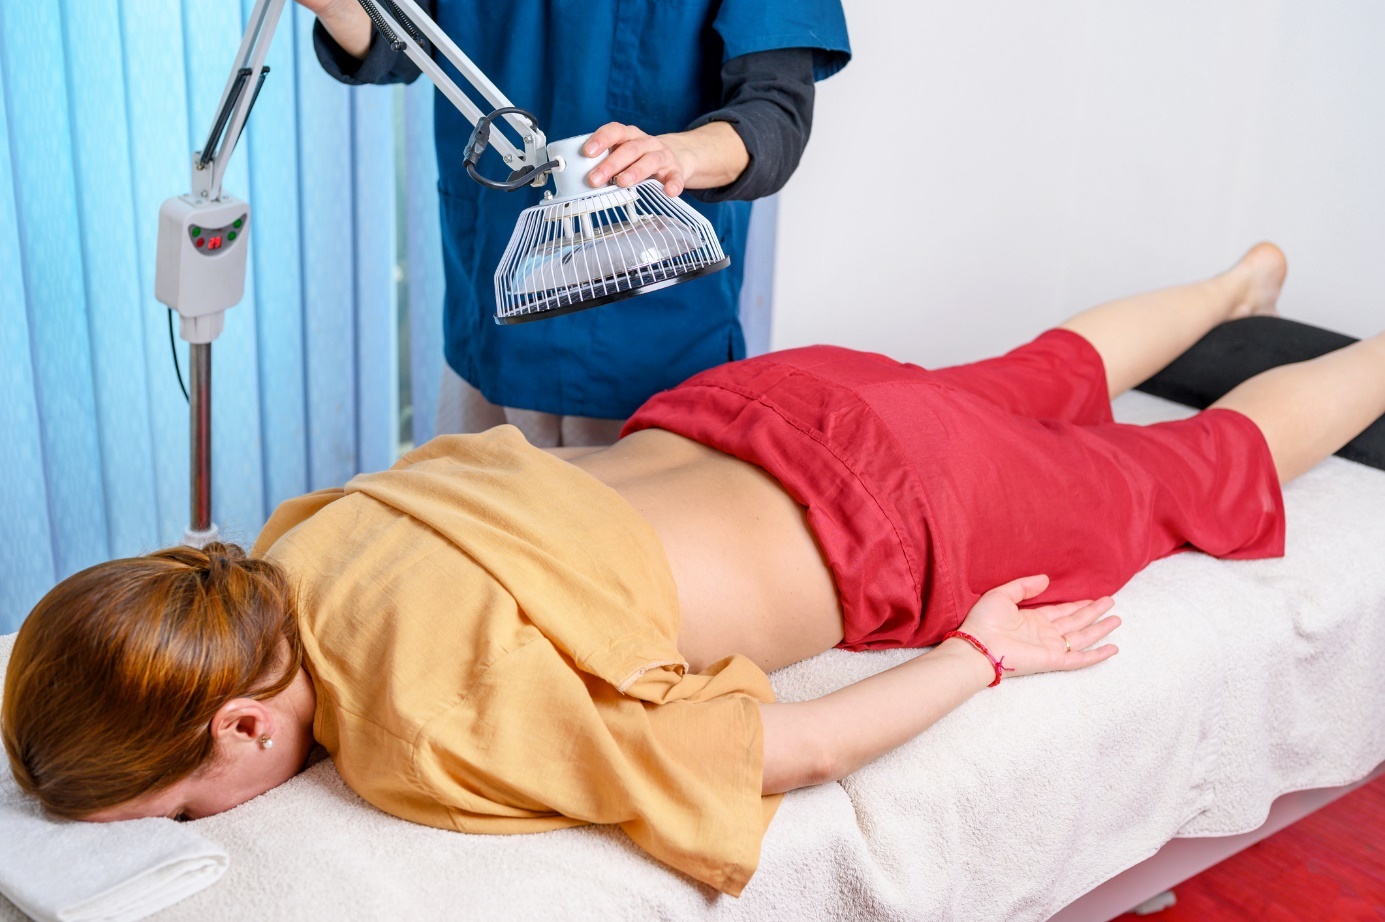 A woman is lying on a bed and a man is placing a biolamp on her sacral area.